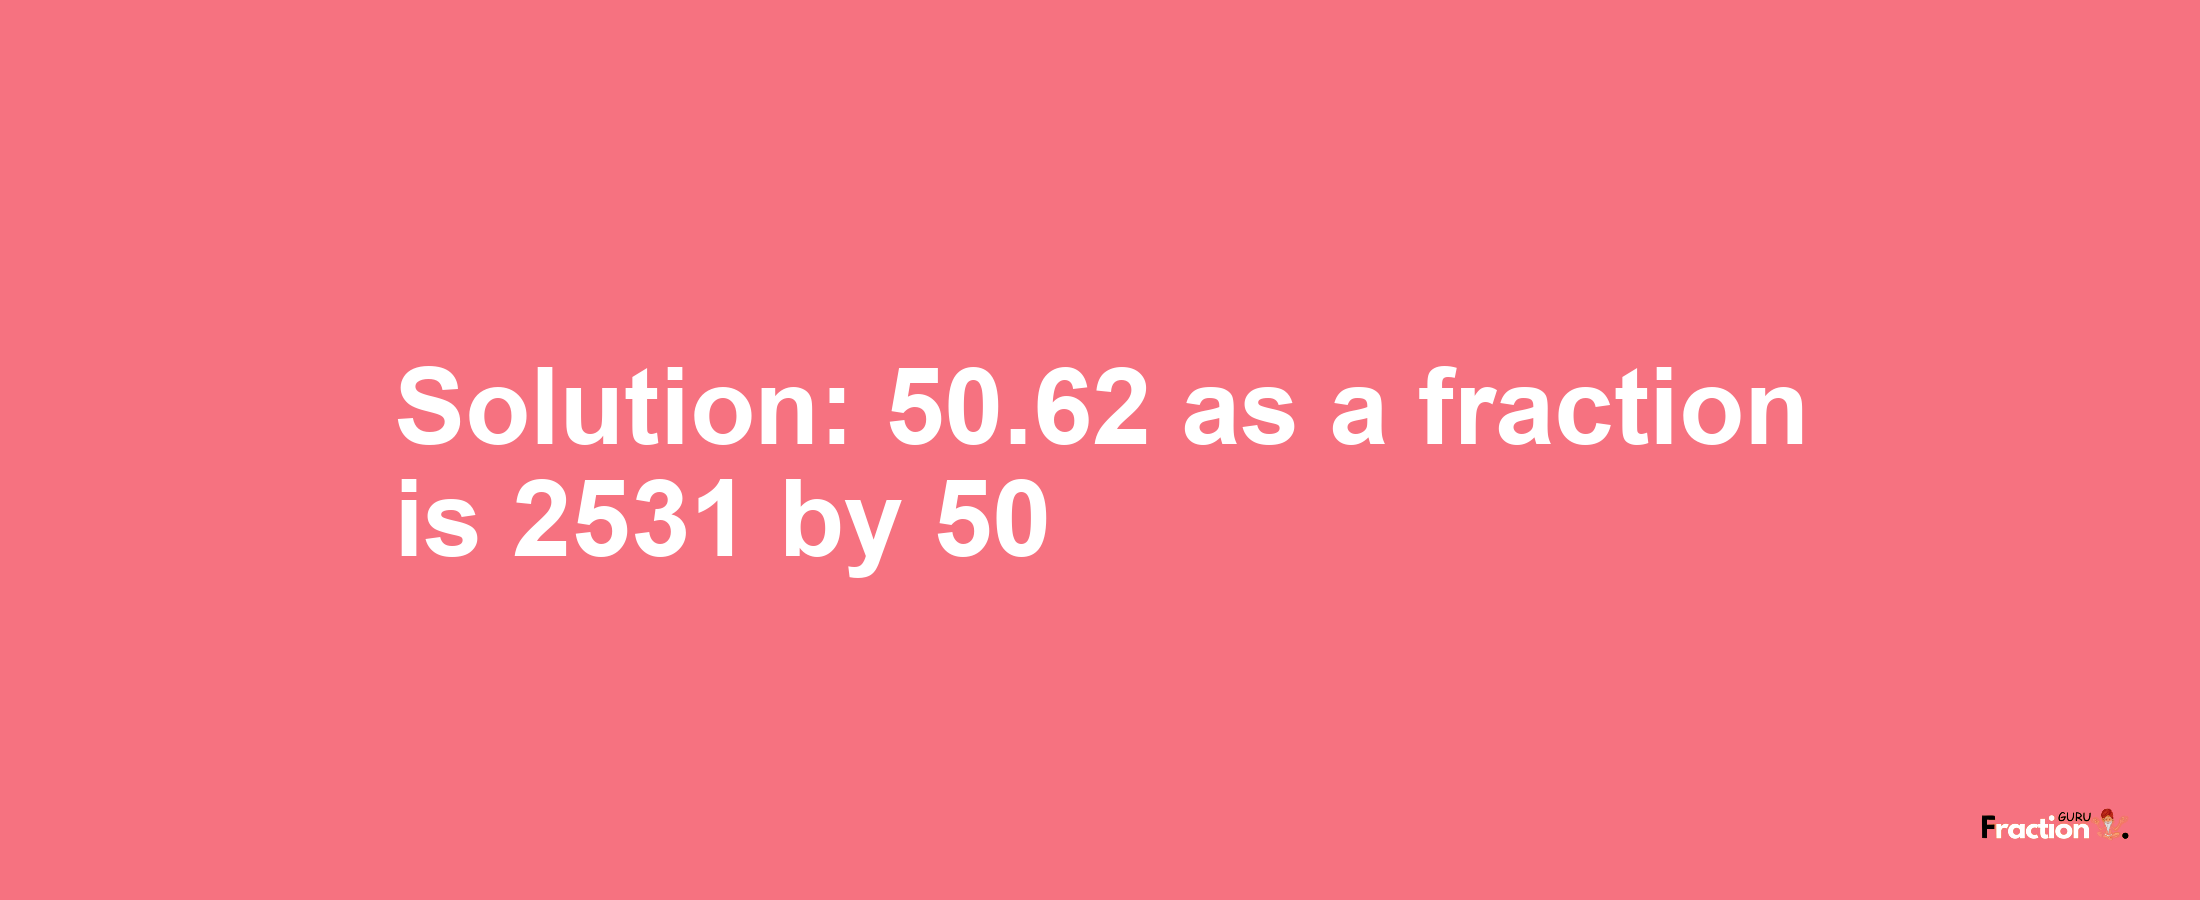 Solution:50.62 as a fraction is 2531/50